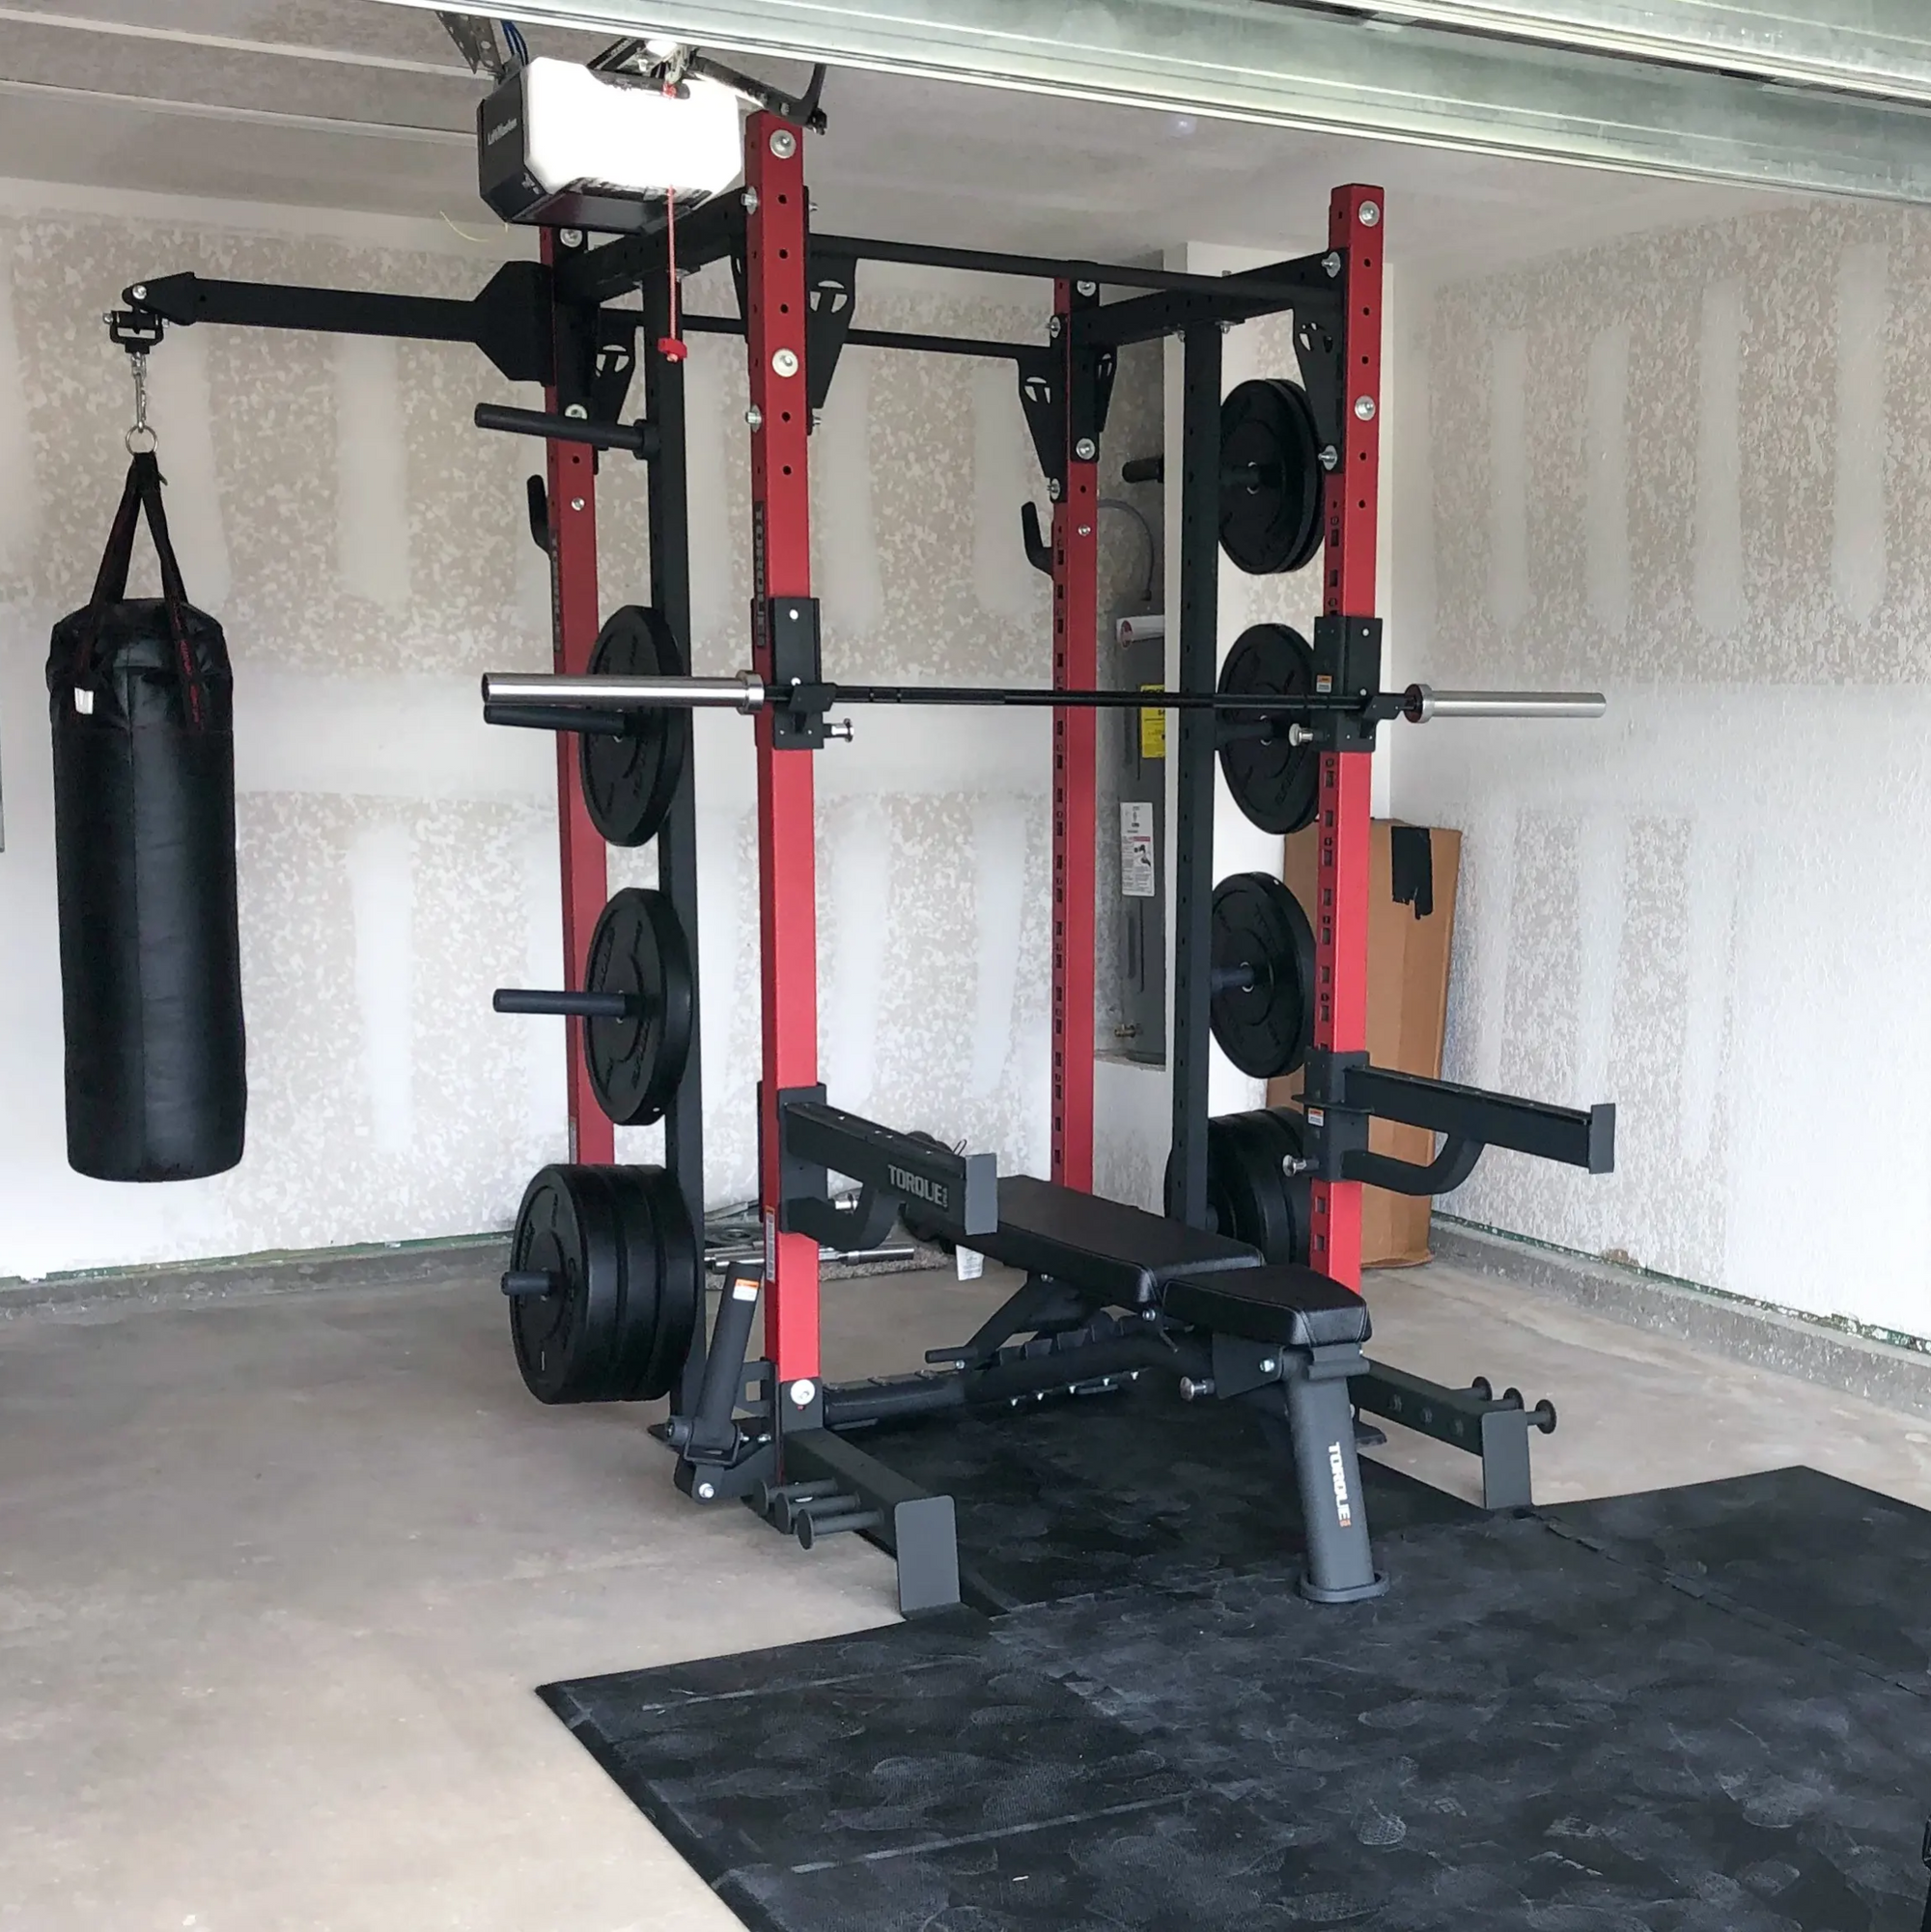 Custom Cage designed by Torque Fitness, completed with barbell & bumper plates